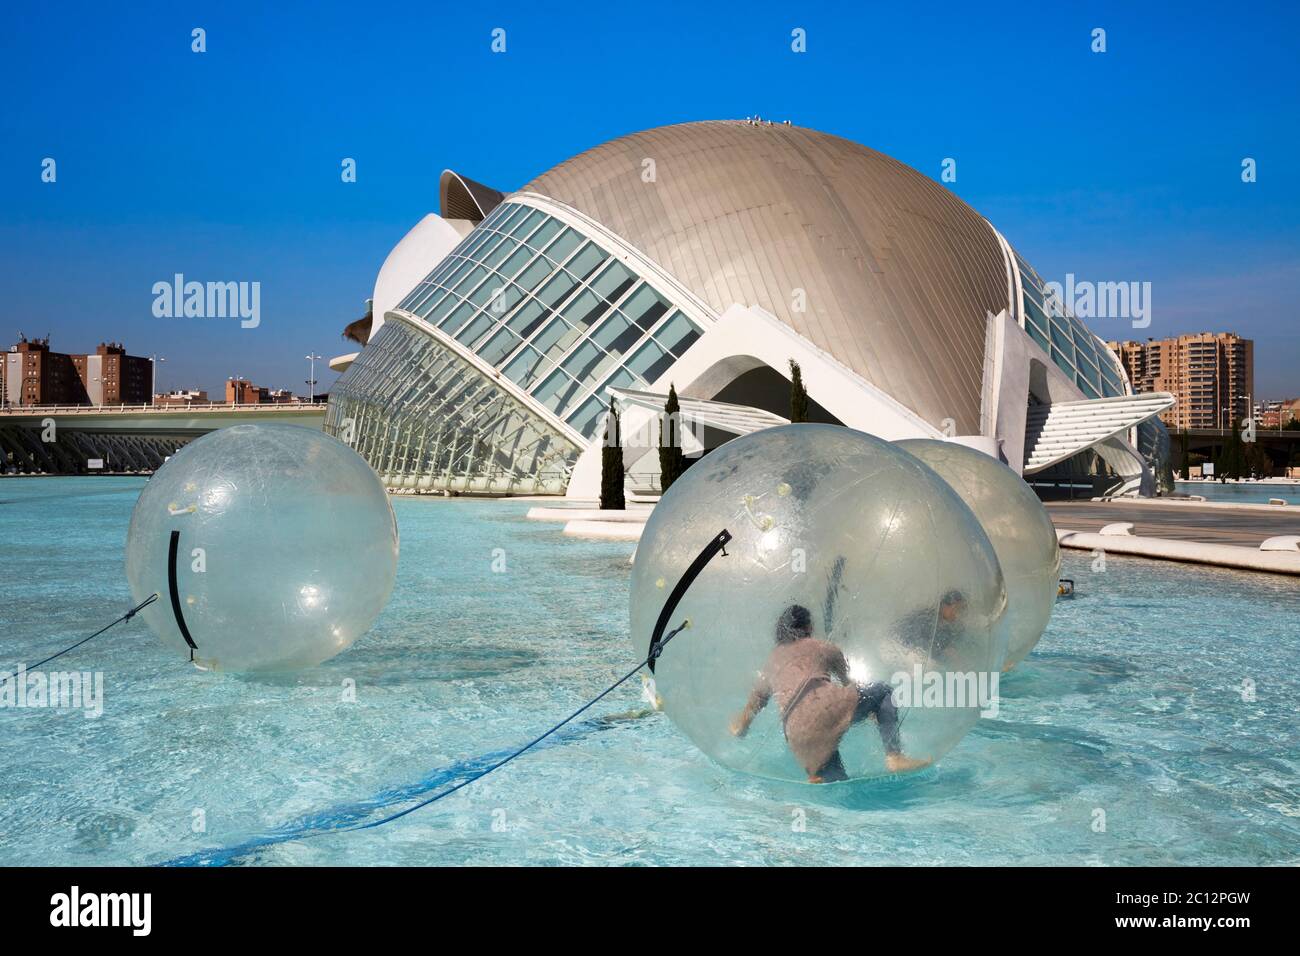 Tourists having fun inside large transparent floating spheres at the science park, Valencia, Spain. Stock Photo